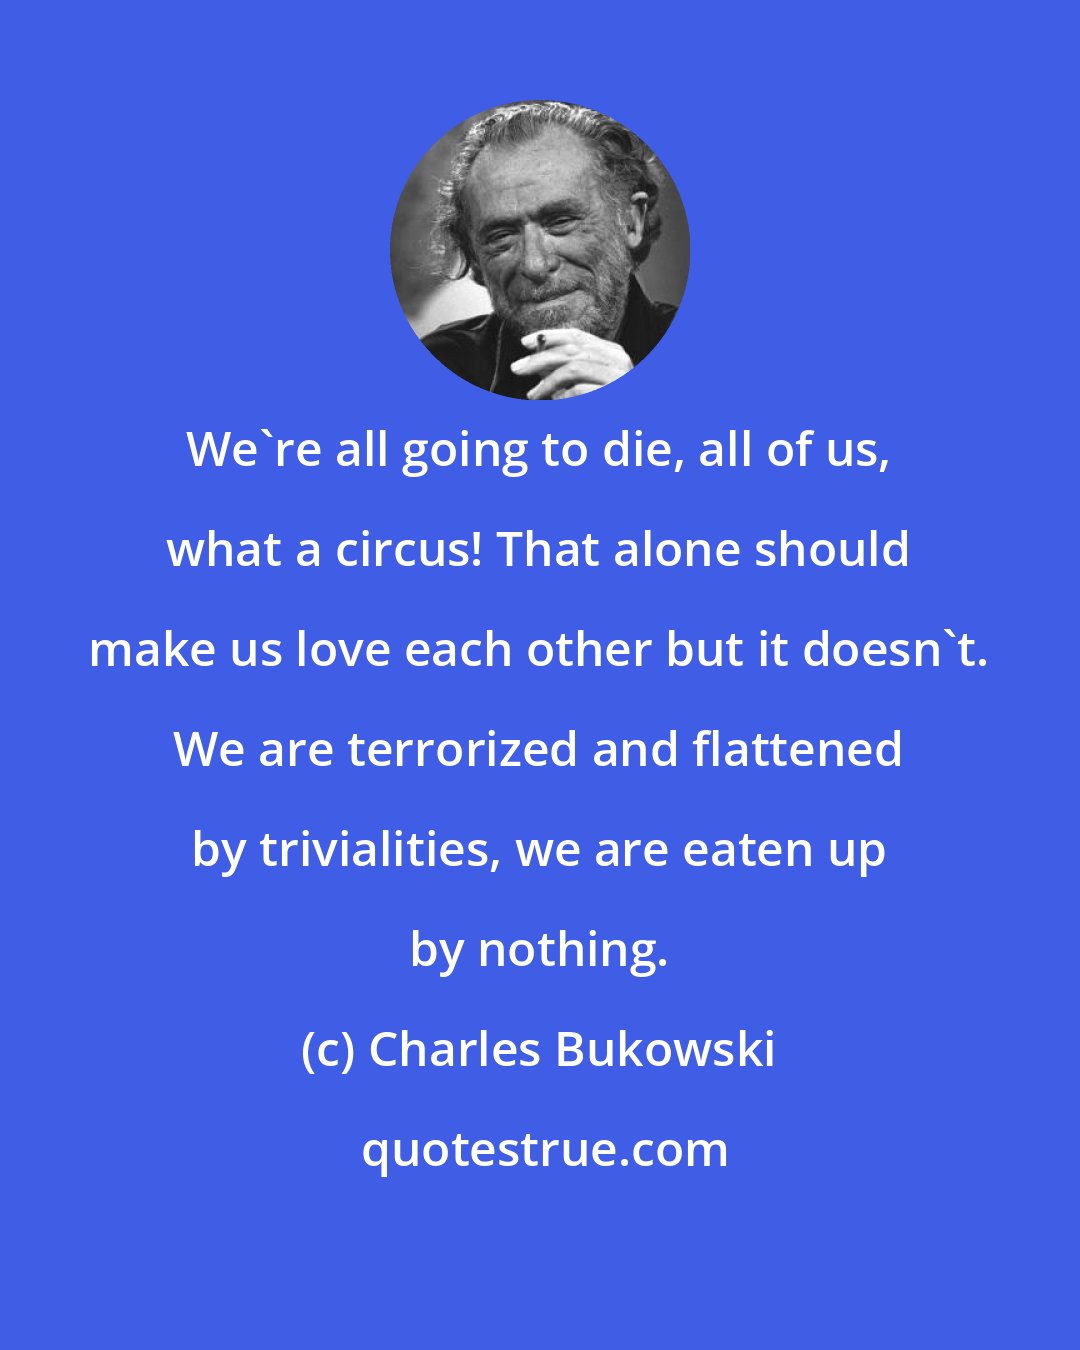 Charles Bukowski: We're all going to die, all of us, what a circus! That alone should make us love each other but it doesn't. We are terrorized and flattened by trivialities, we are eaten up by nothing.